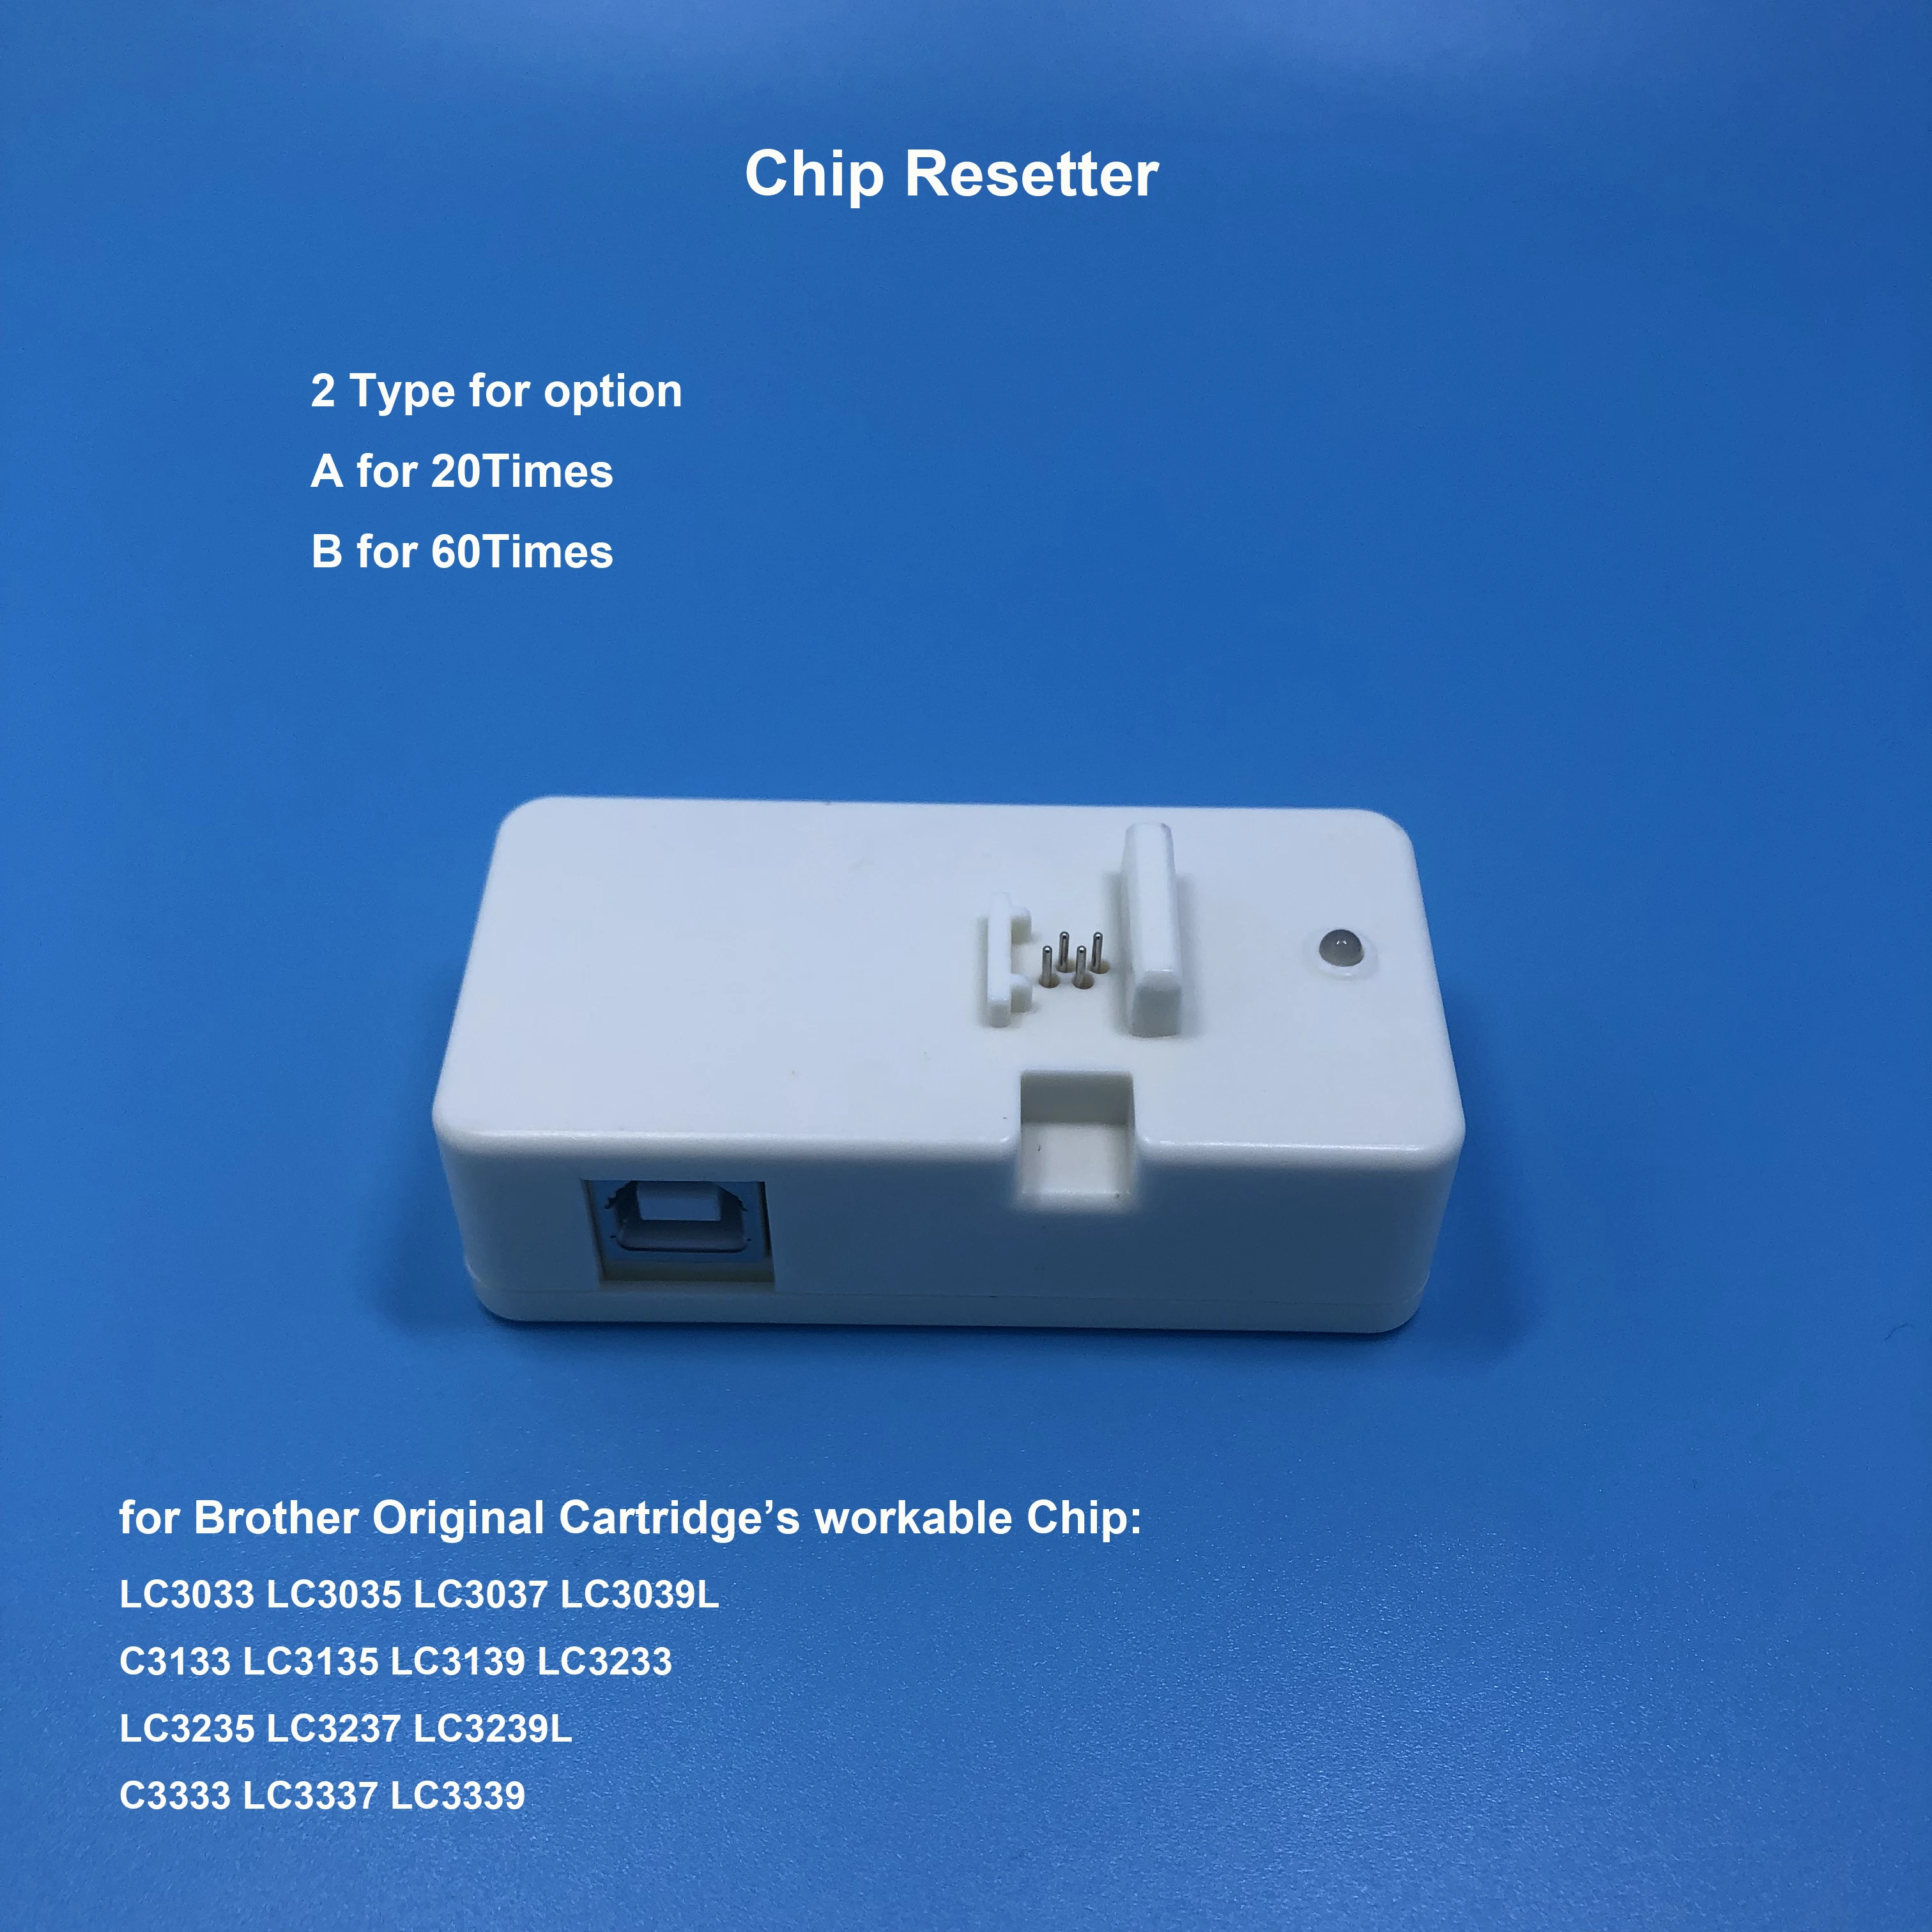 

Chip Resetter for Brother LC3033 LC3035 LC3037 LC3039 Original Chip for MFC-J805DW MFC-J805DWXL MFC-J815DW MFC-J995DW MFC-J995DW